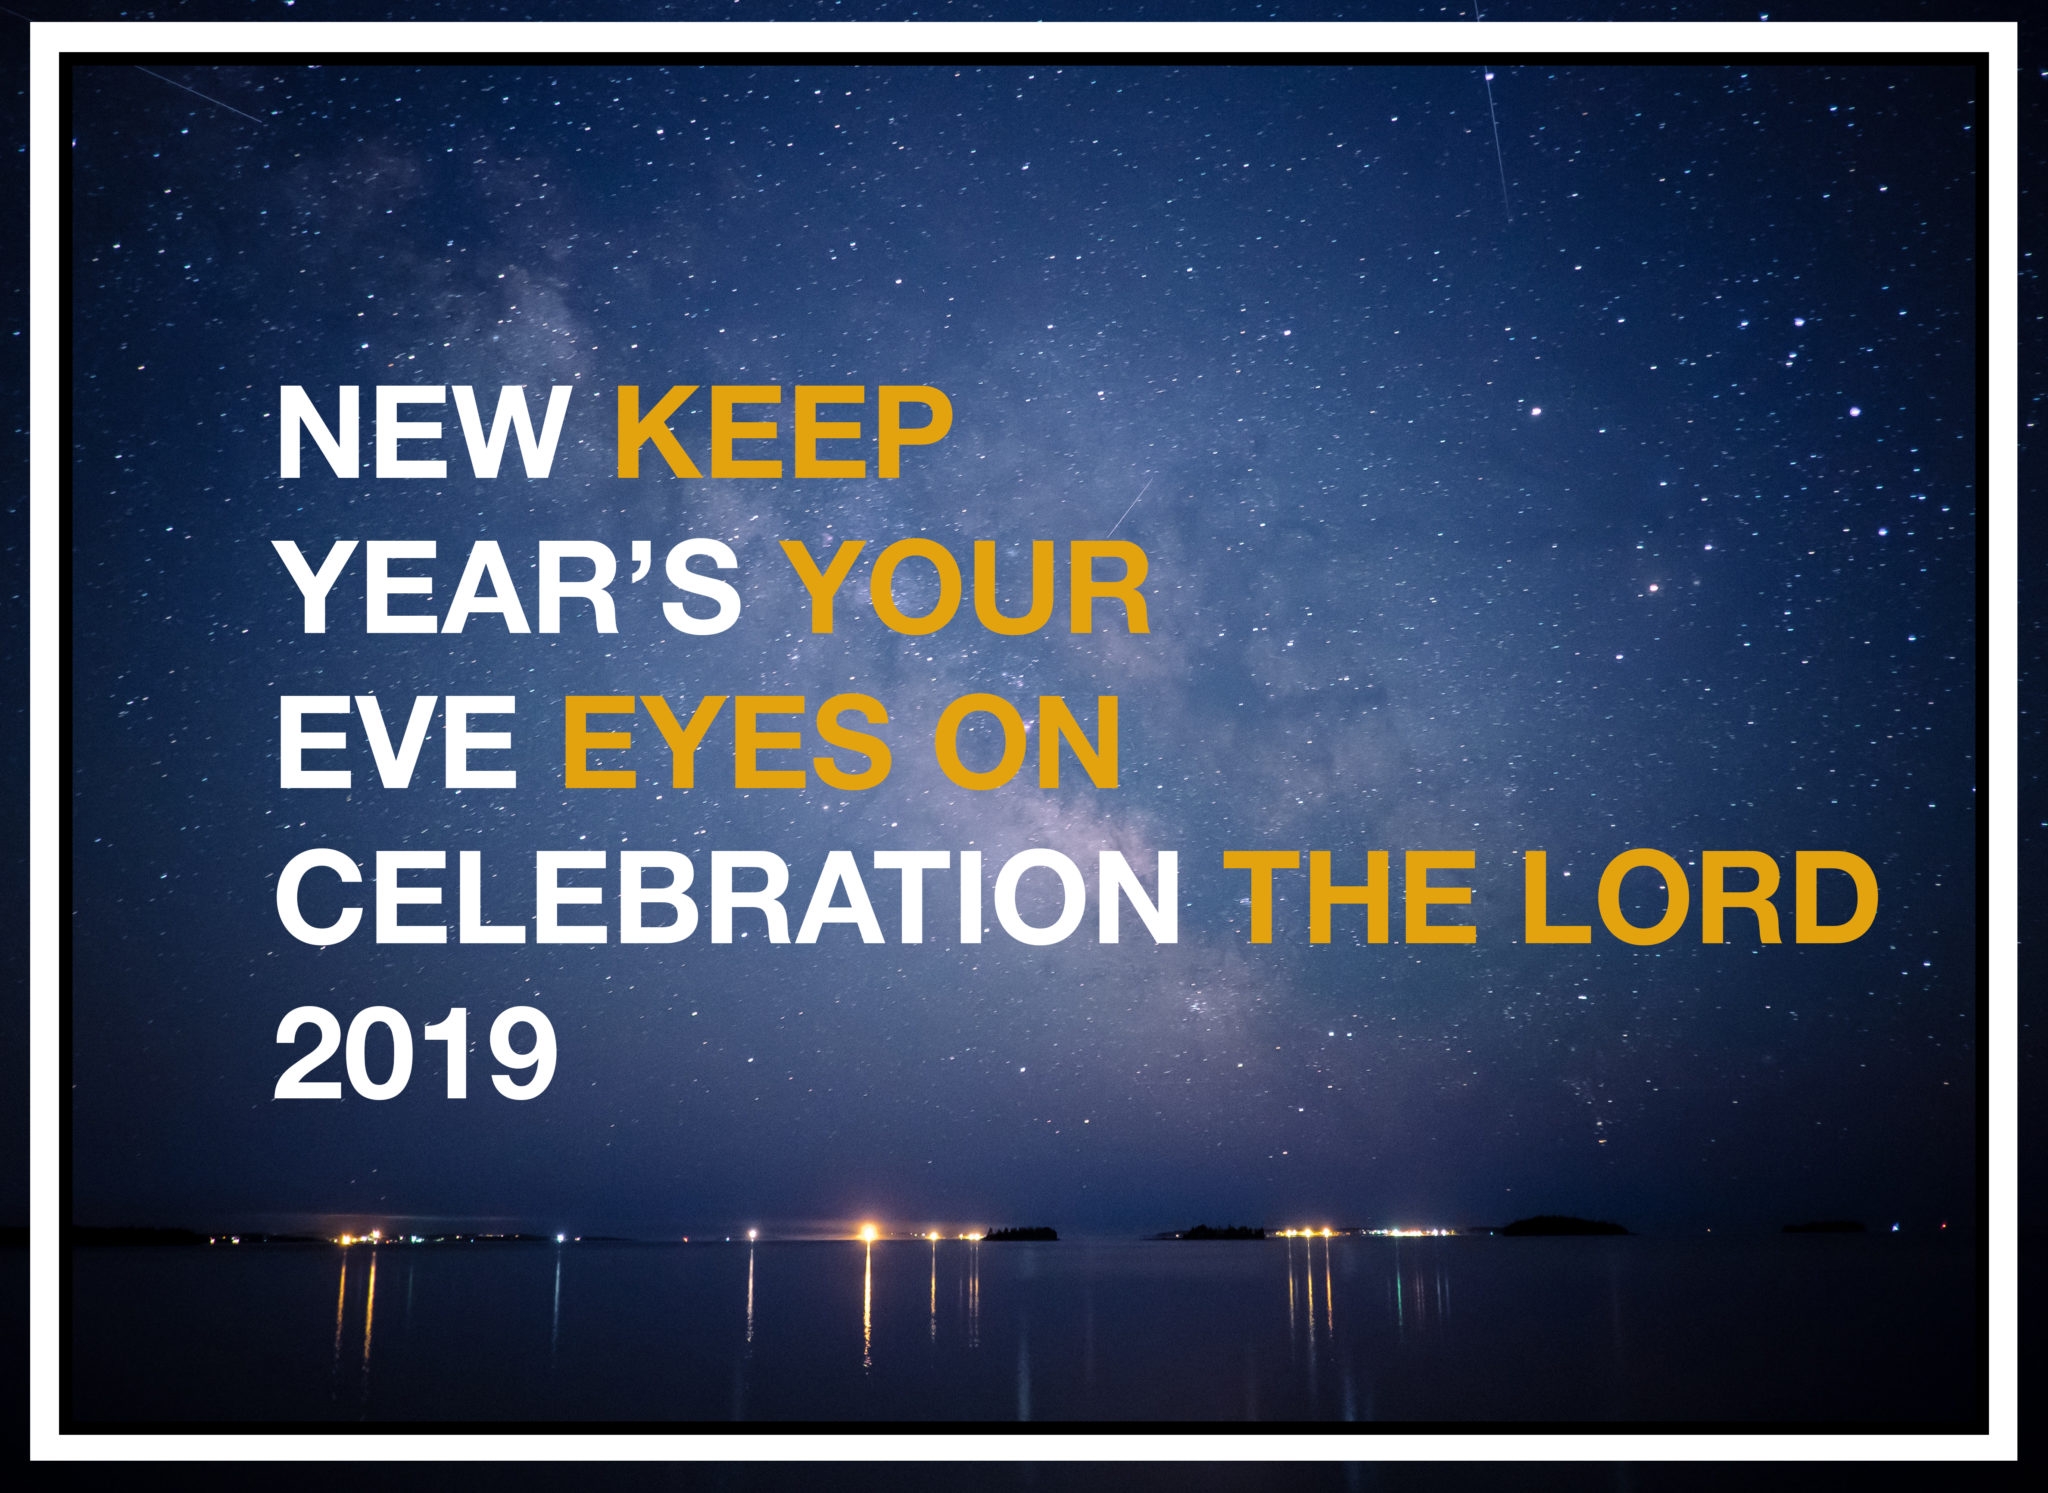 KEEP YOUR EYES ON THE LORD